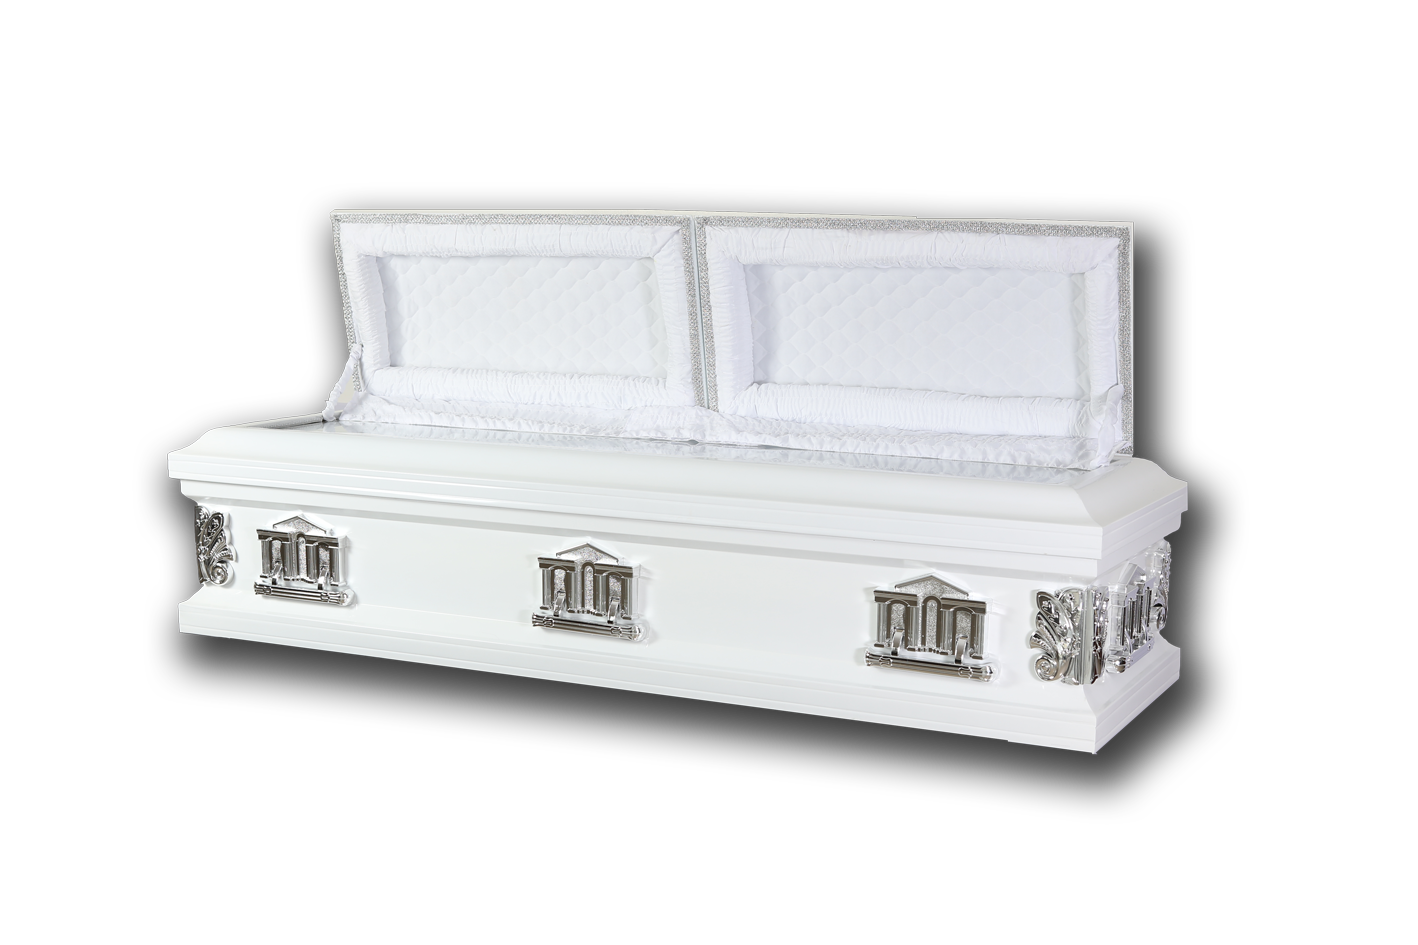  Included casket from ST. GREGORY traditional pre-need plan from St Peter Life plan